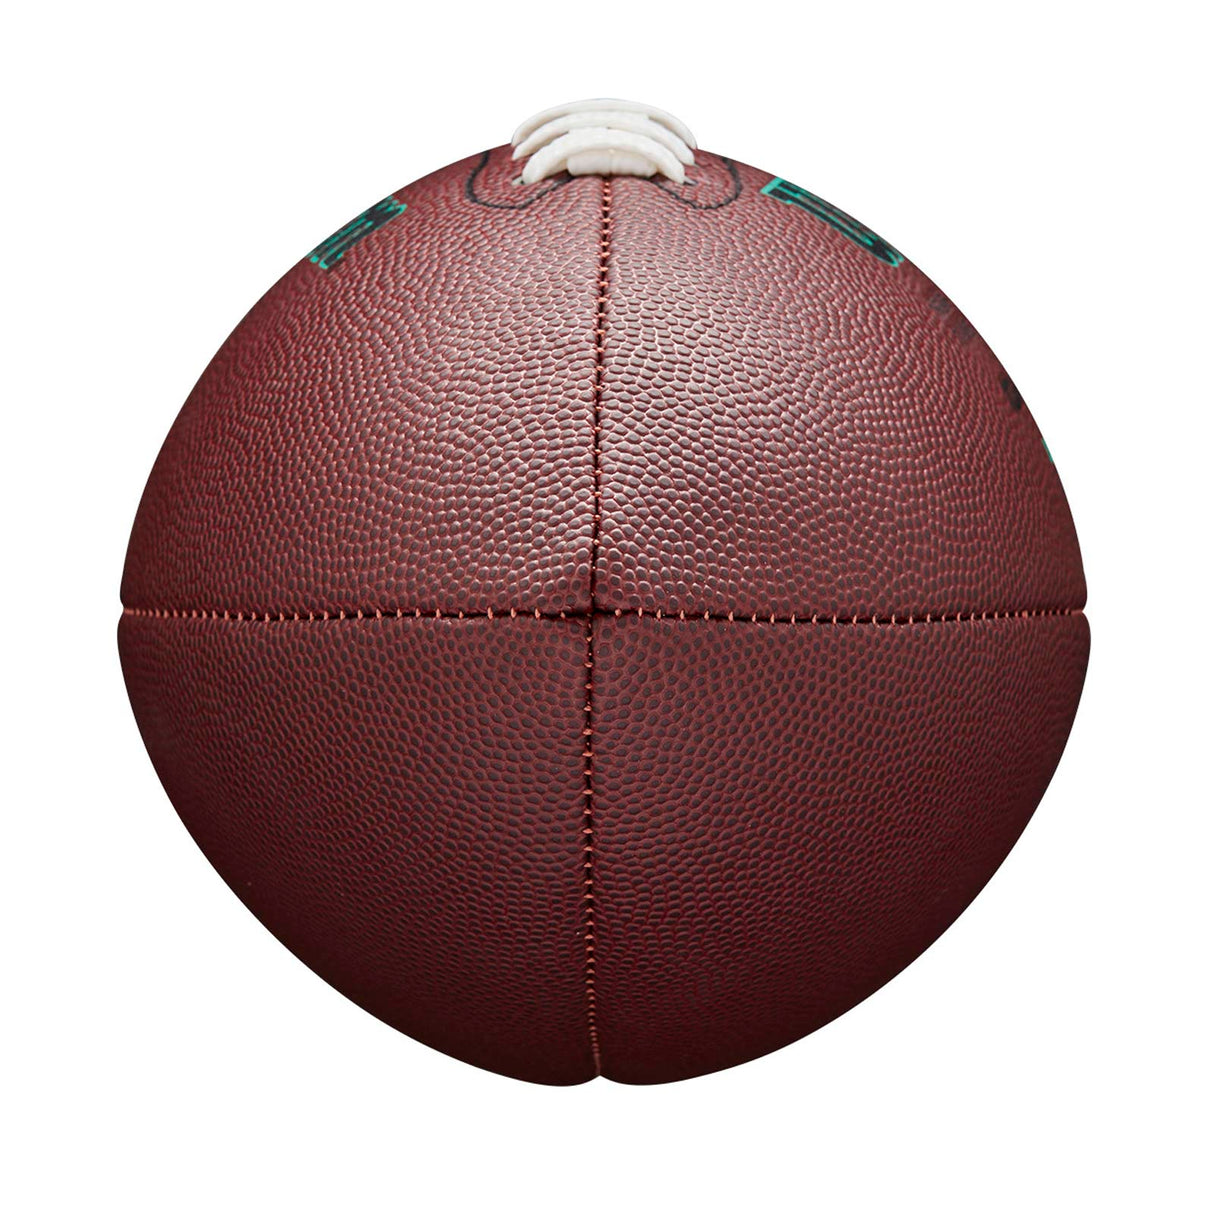 Wilson NFL Ignition Pro Eco Football - Brown